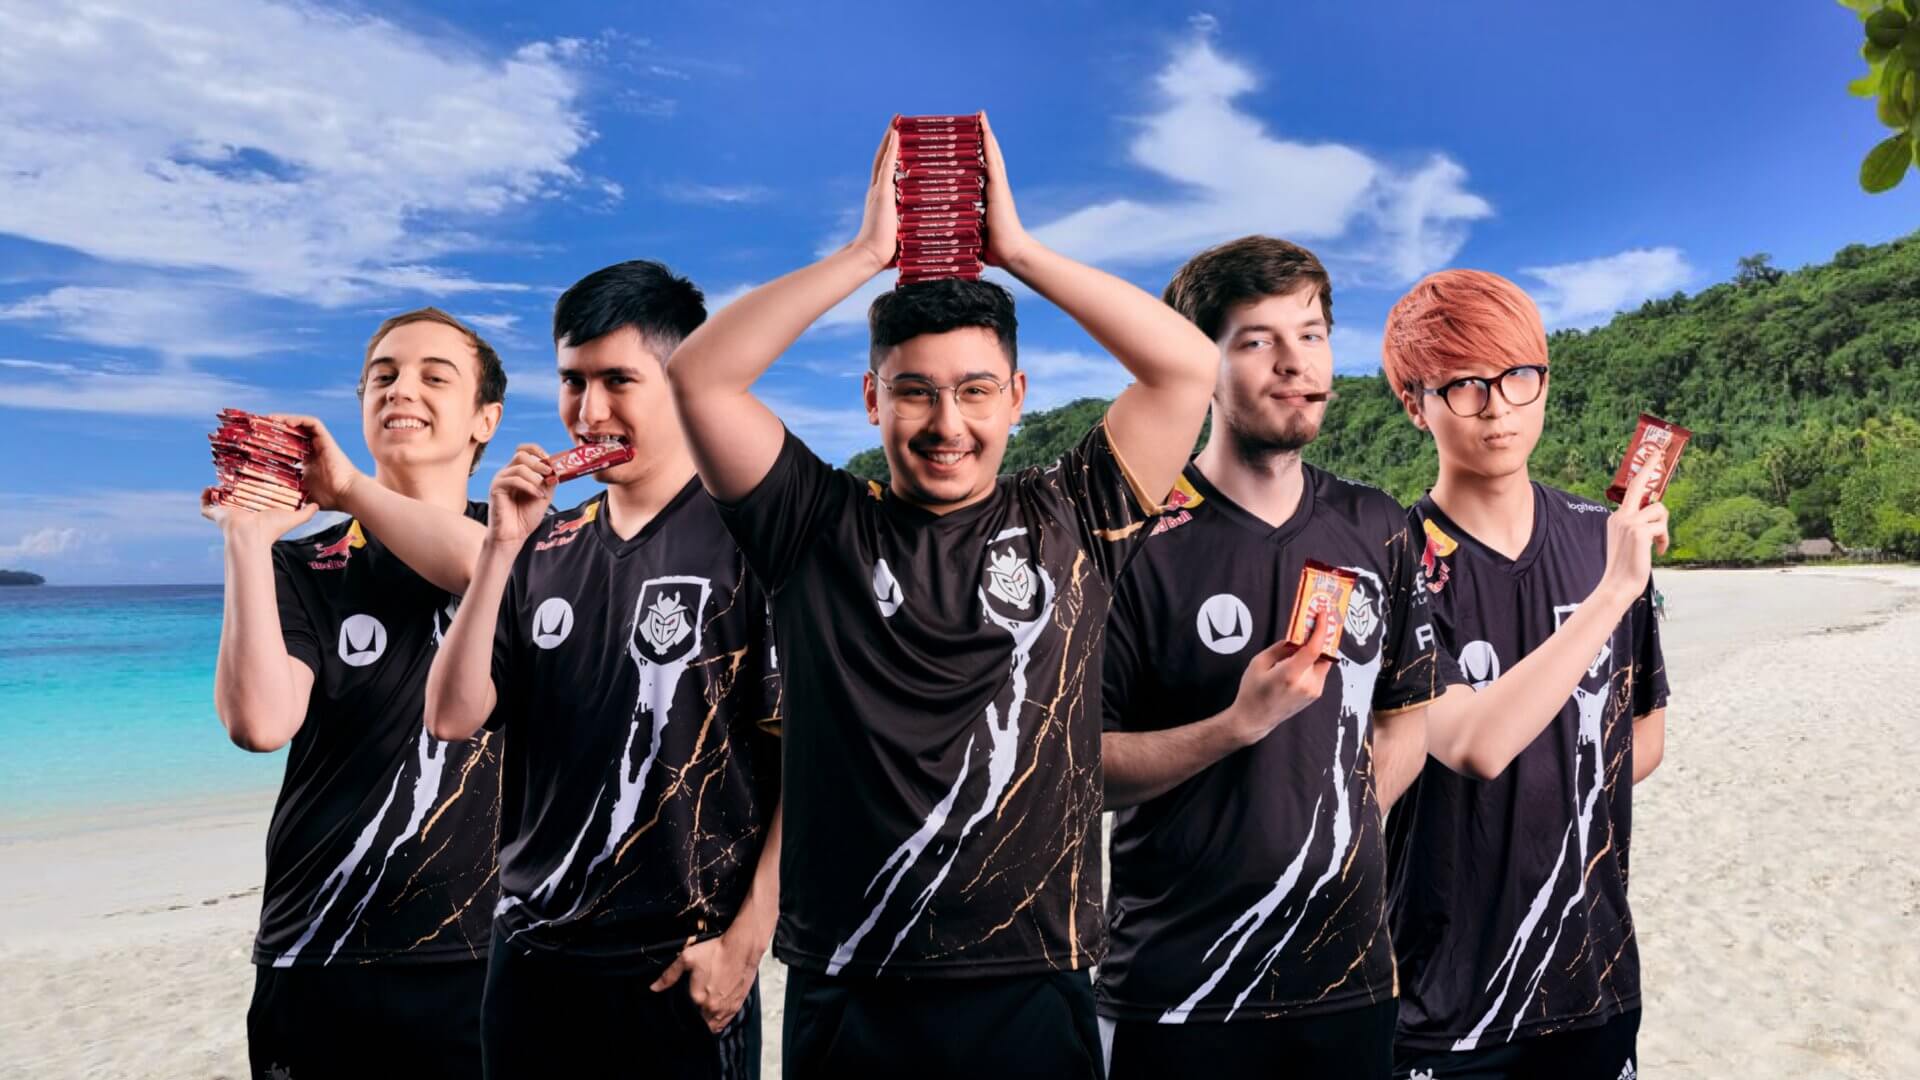 G2 is one win away from the LEC title!